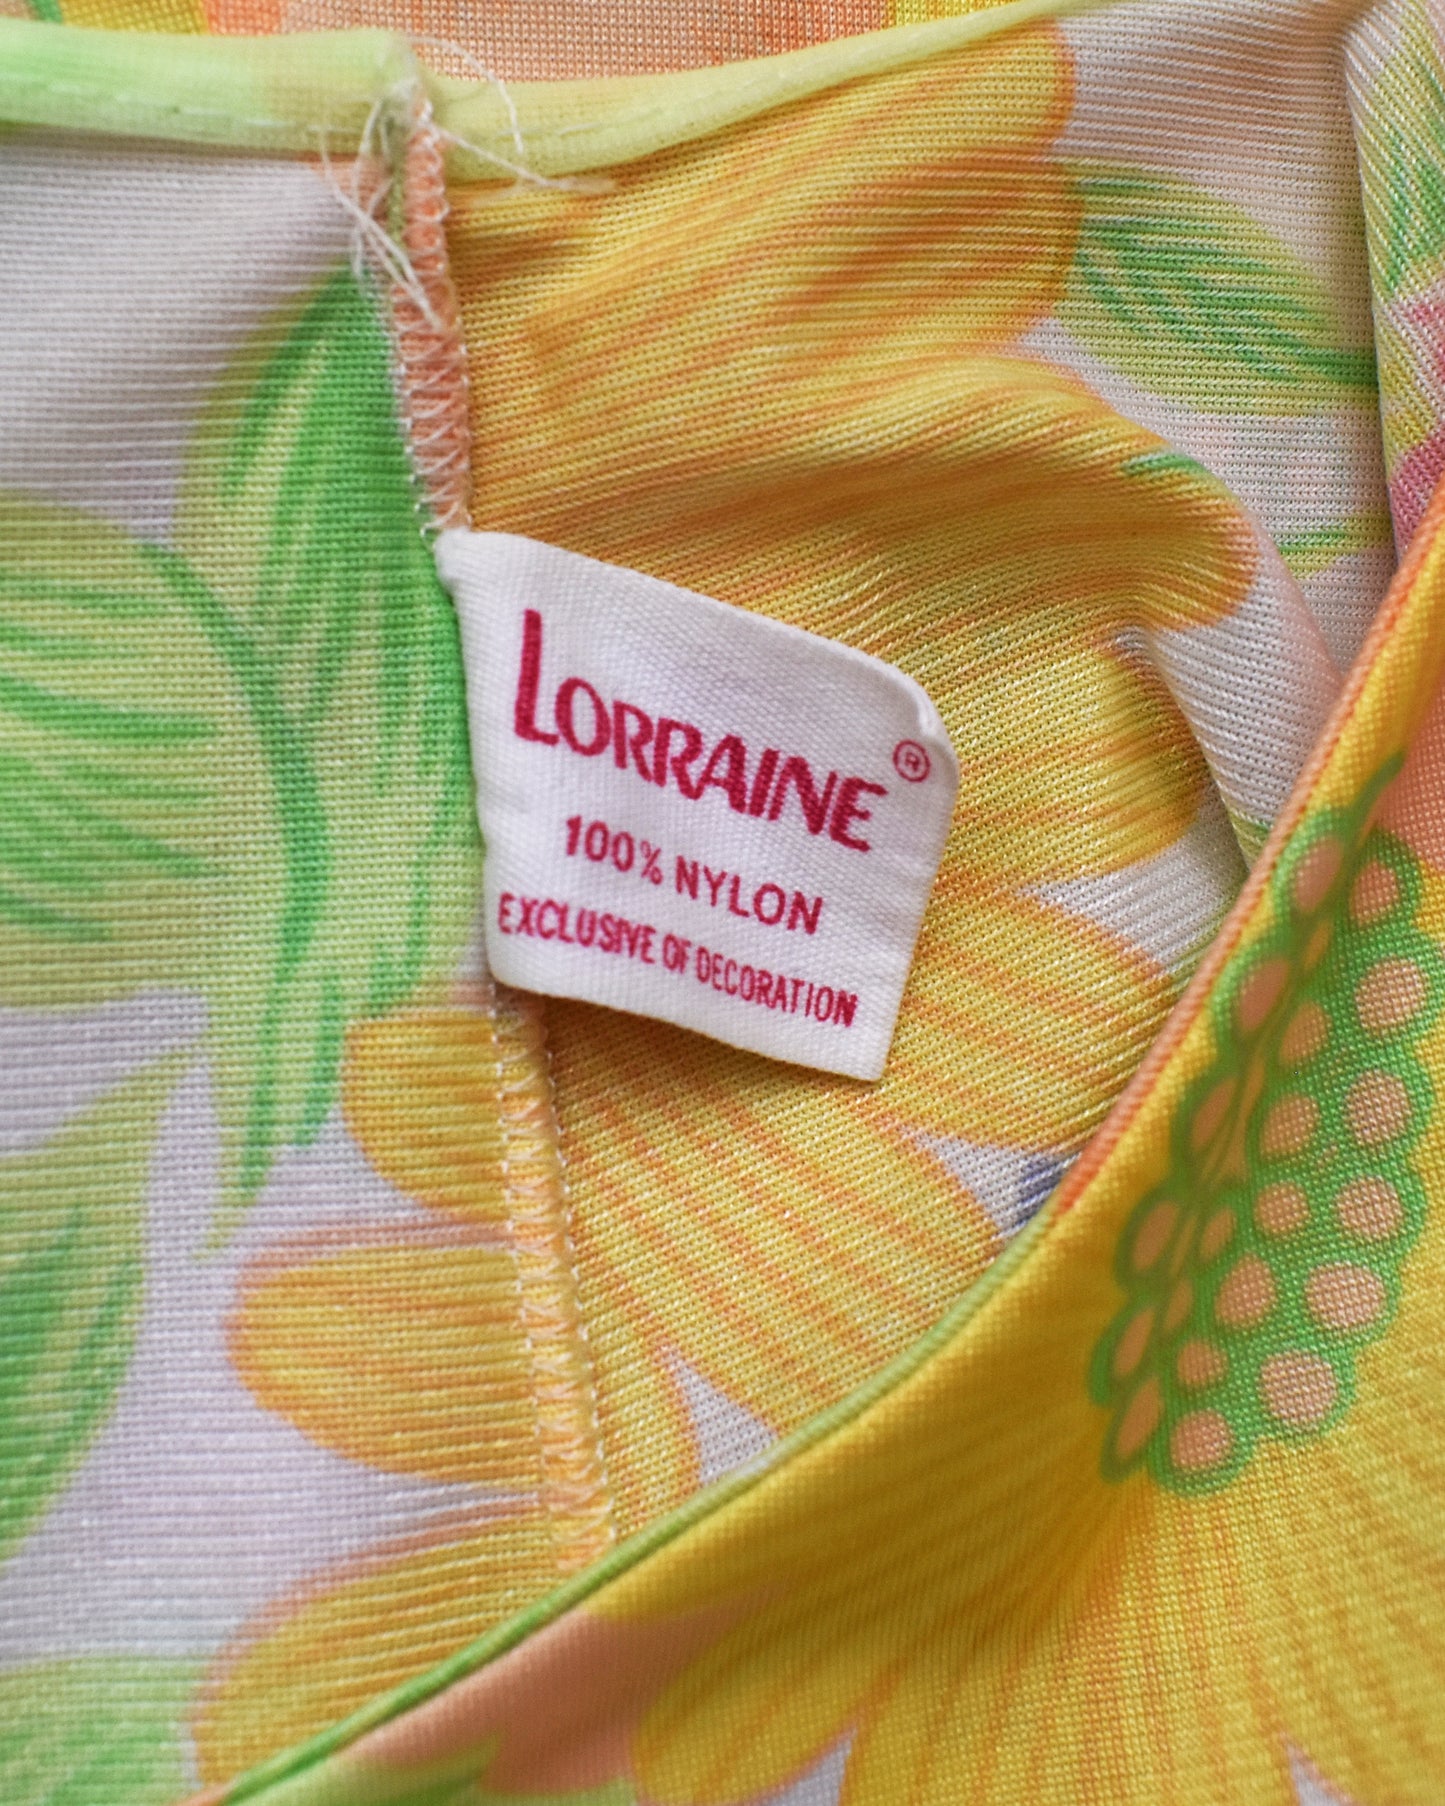 Close up of the tag which says Lorraine